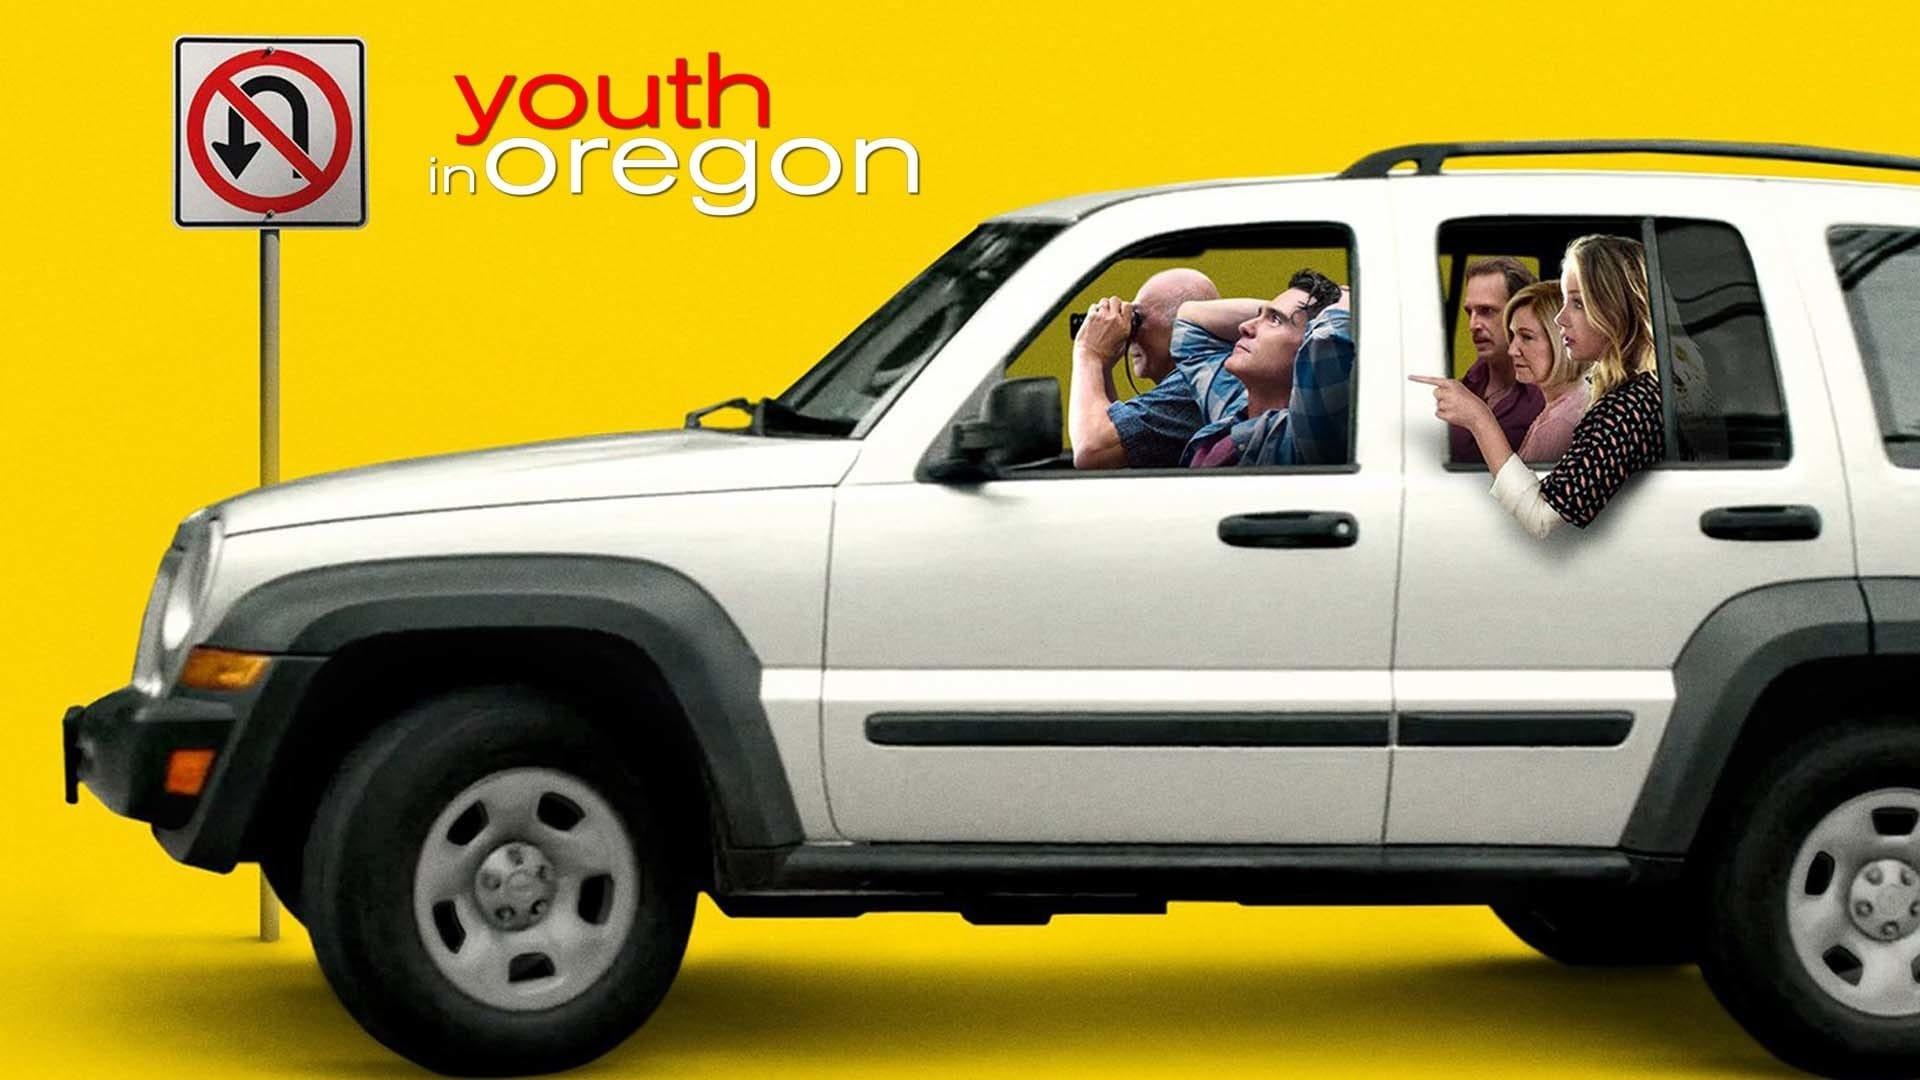 Youth in Oregon backdrop